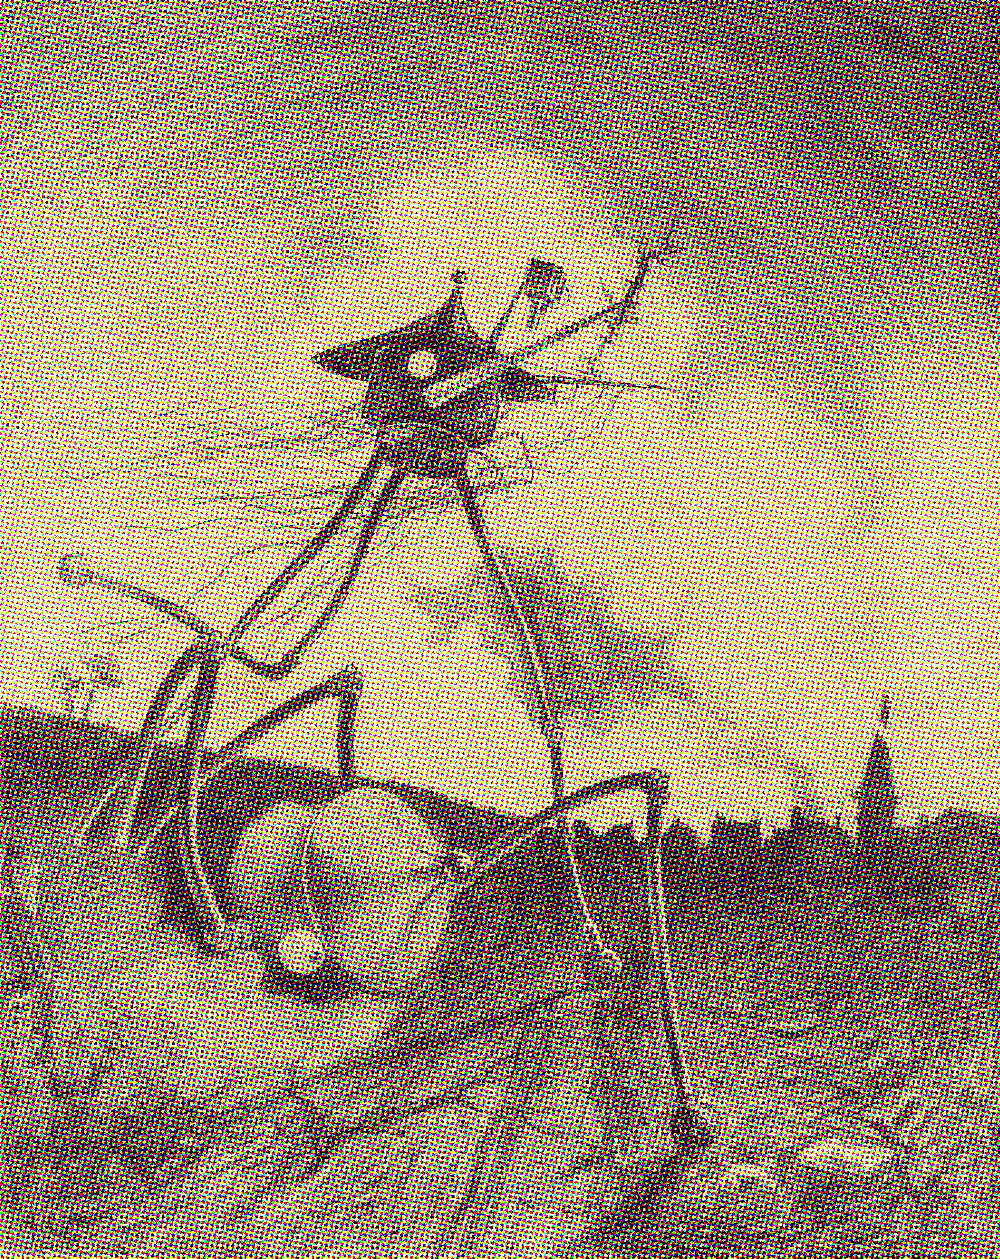 Tripods from 'The War of the Worlds'